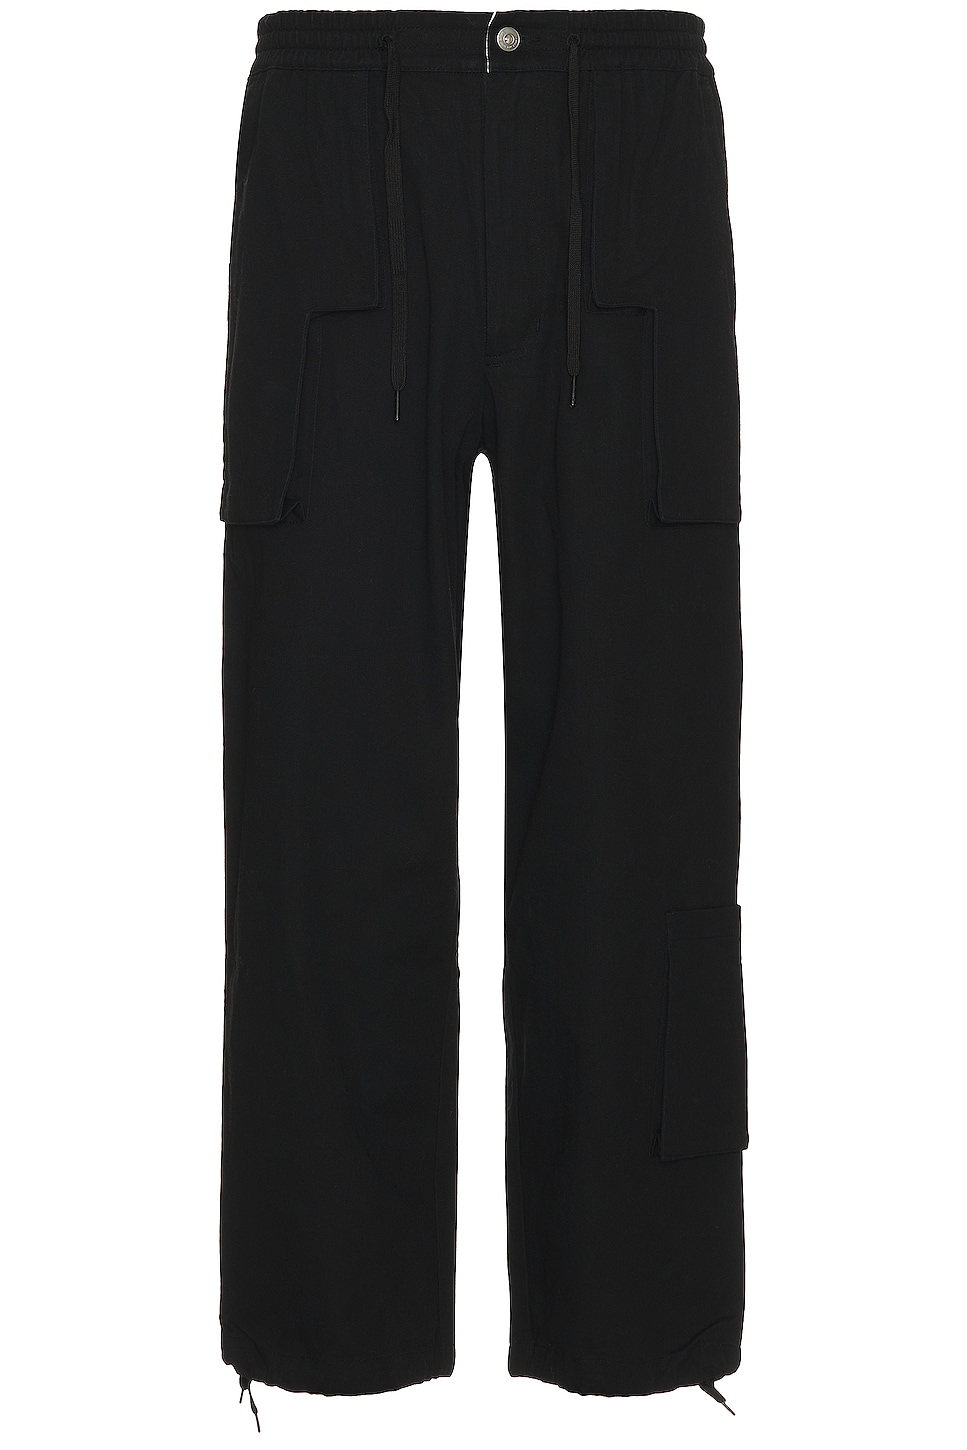 Image 1 of P.A.M. Perks and Mini P. World Return Pant in Black